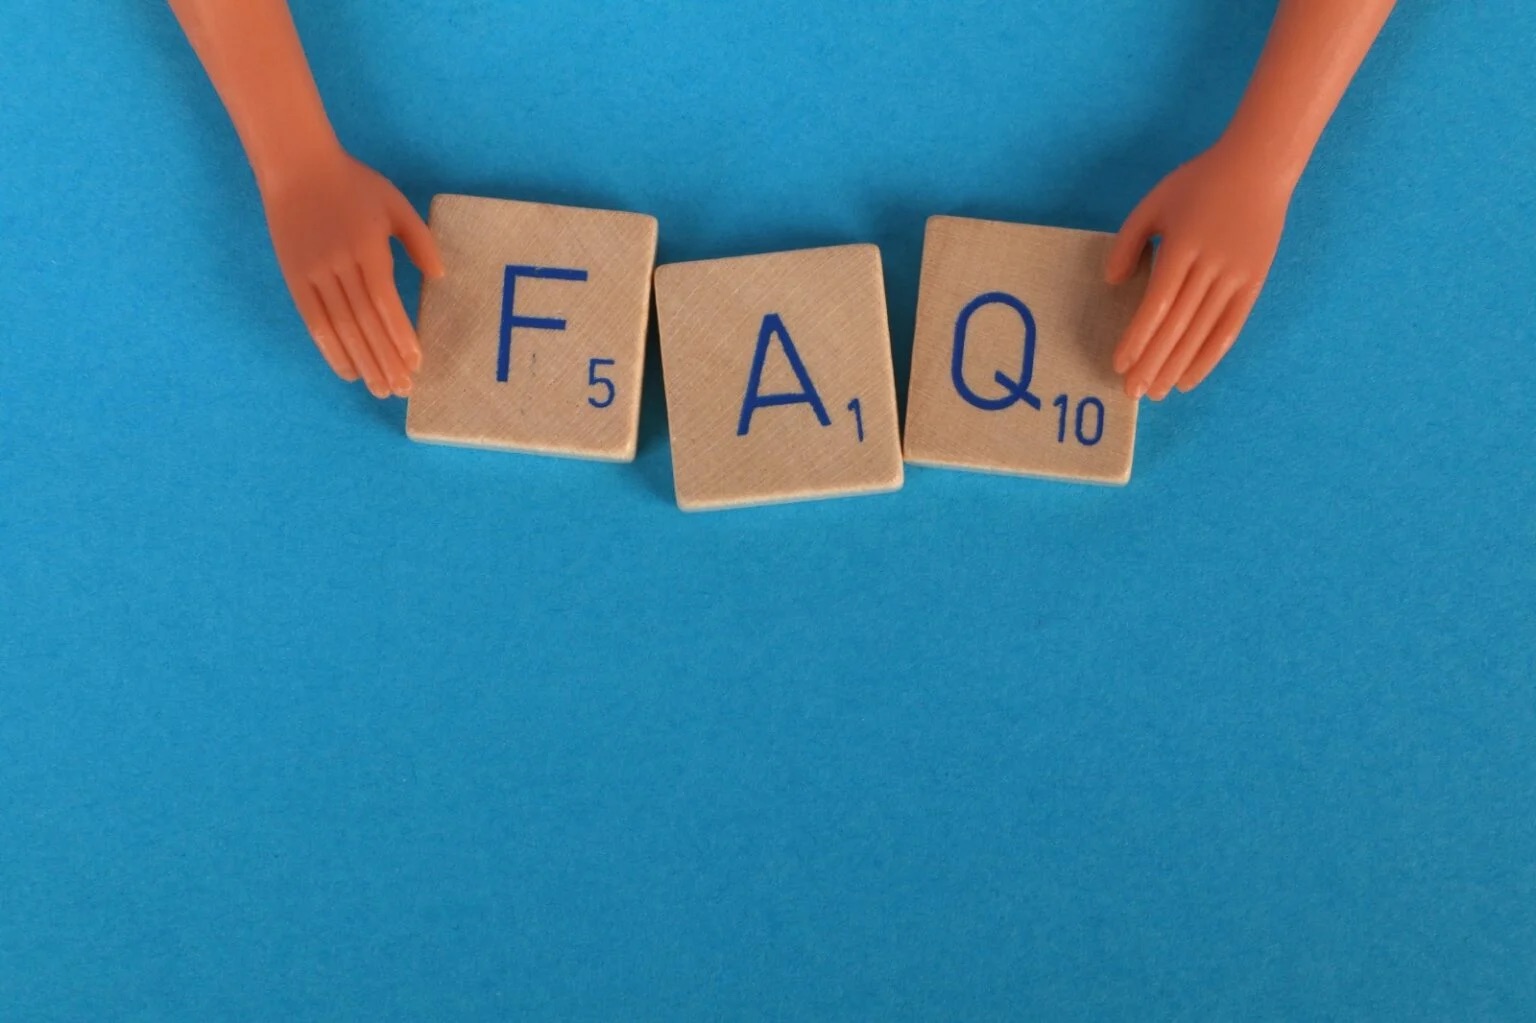 FAQ PAGES CAN BE GREAT FOR SEO